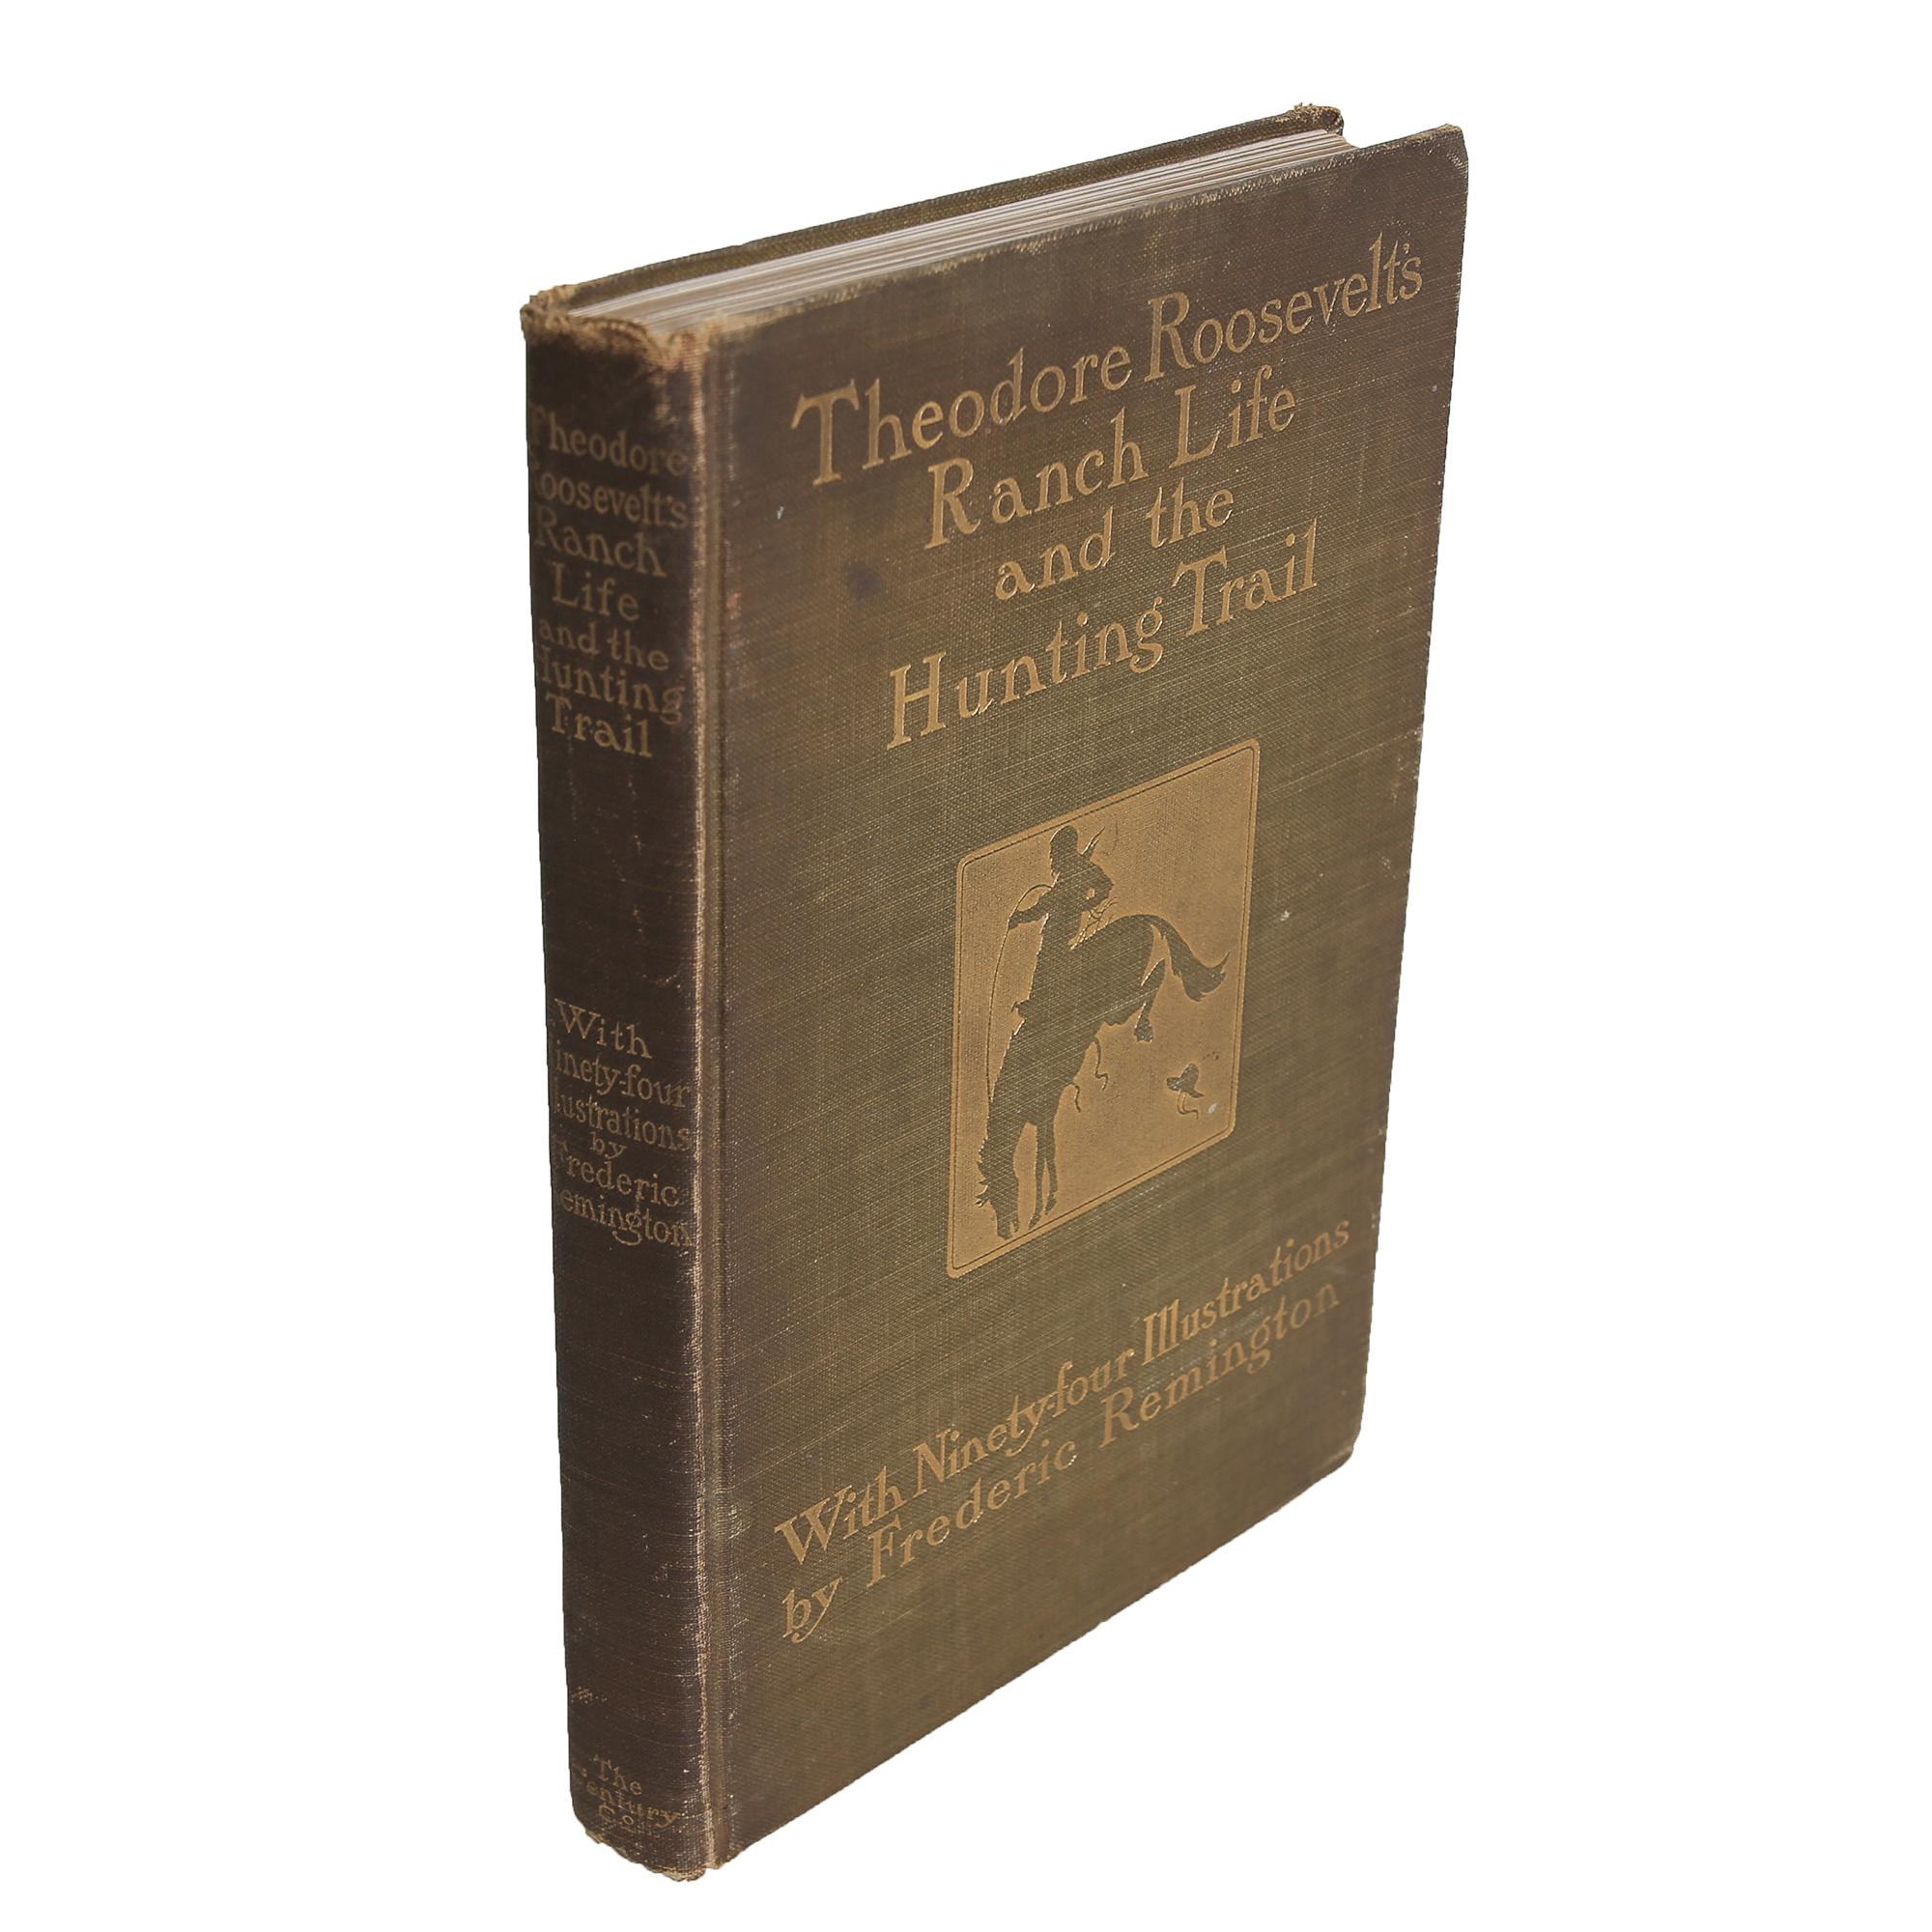 Roosevelt's Ranch Life and the Hunting Trail, Illustrated by Frederic Remington  2